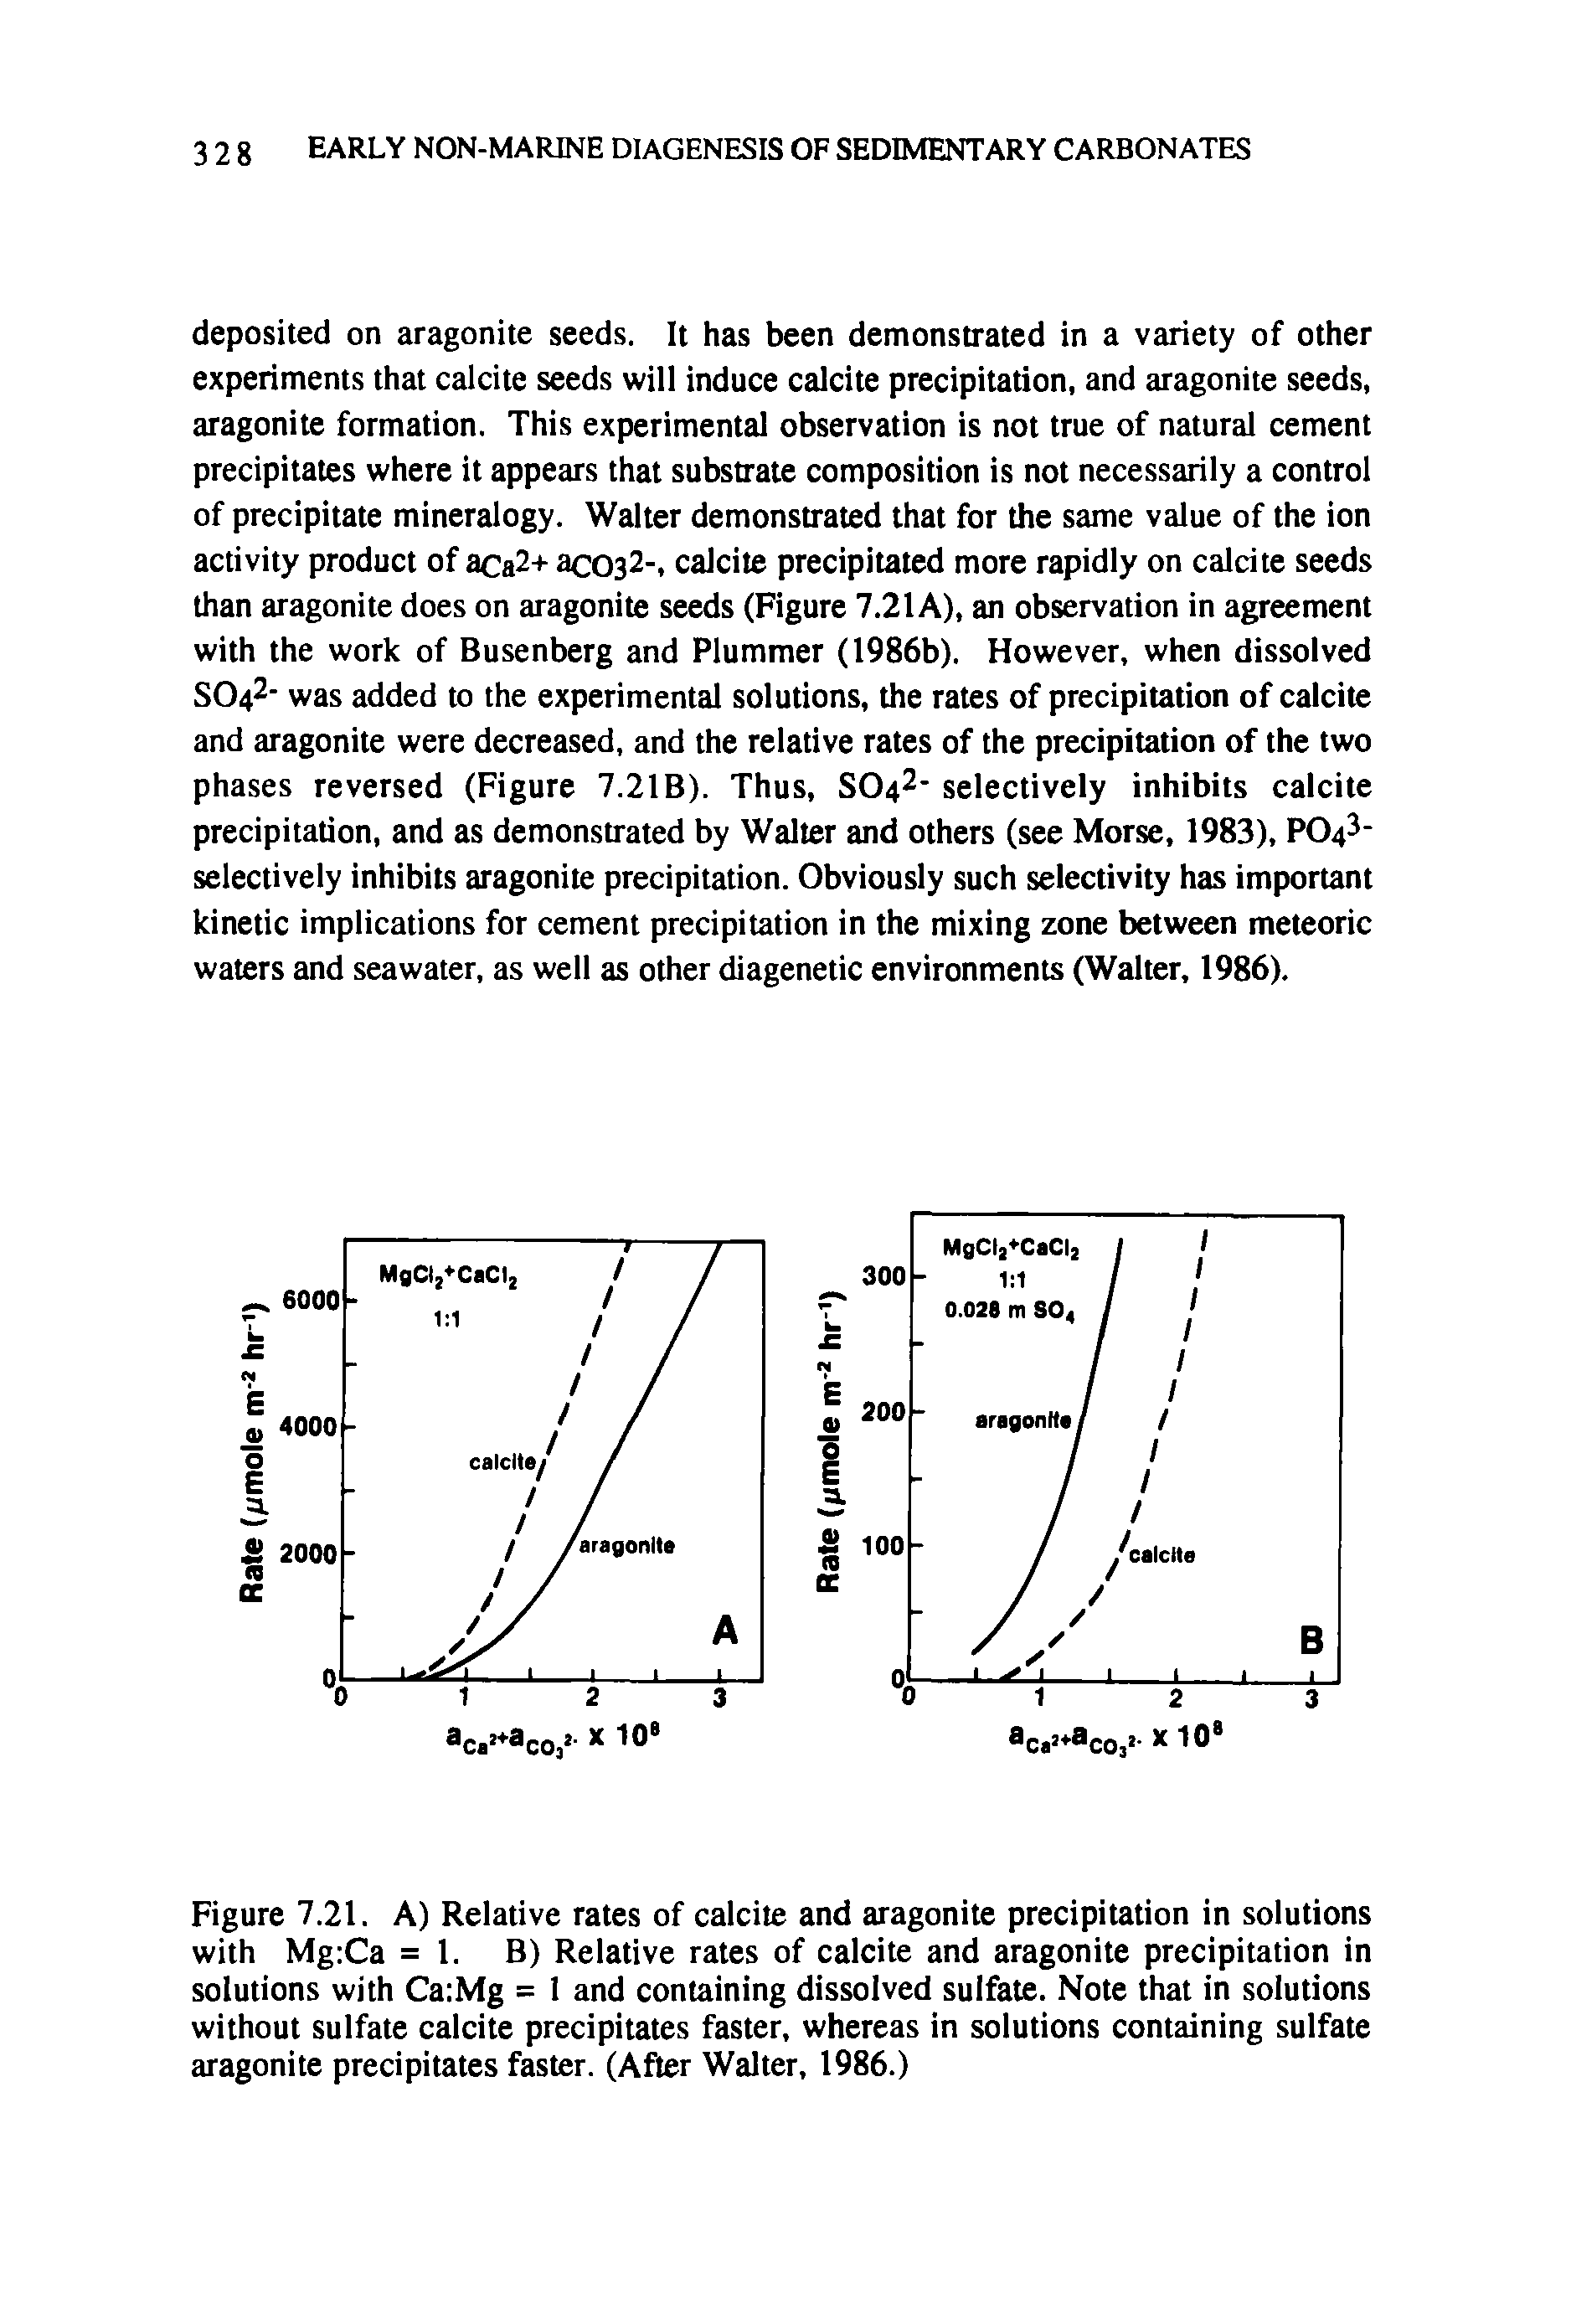 Figure 7.21. A) Relative rates of calcite and aragonite precipitation in solutions with Mg Ca =1. B) Relative rates of calcite and aragonite precipitation in solutions with Ca Mg = 1 and containing dissolved sulfate. Note that in solutions without sulfate calcite precipitates faster, whereas in solutions containing sulfate aragonite precipitates faster. (After Walter, 1986.)...